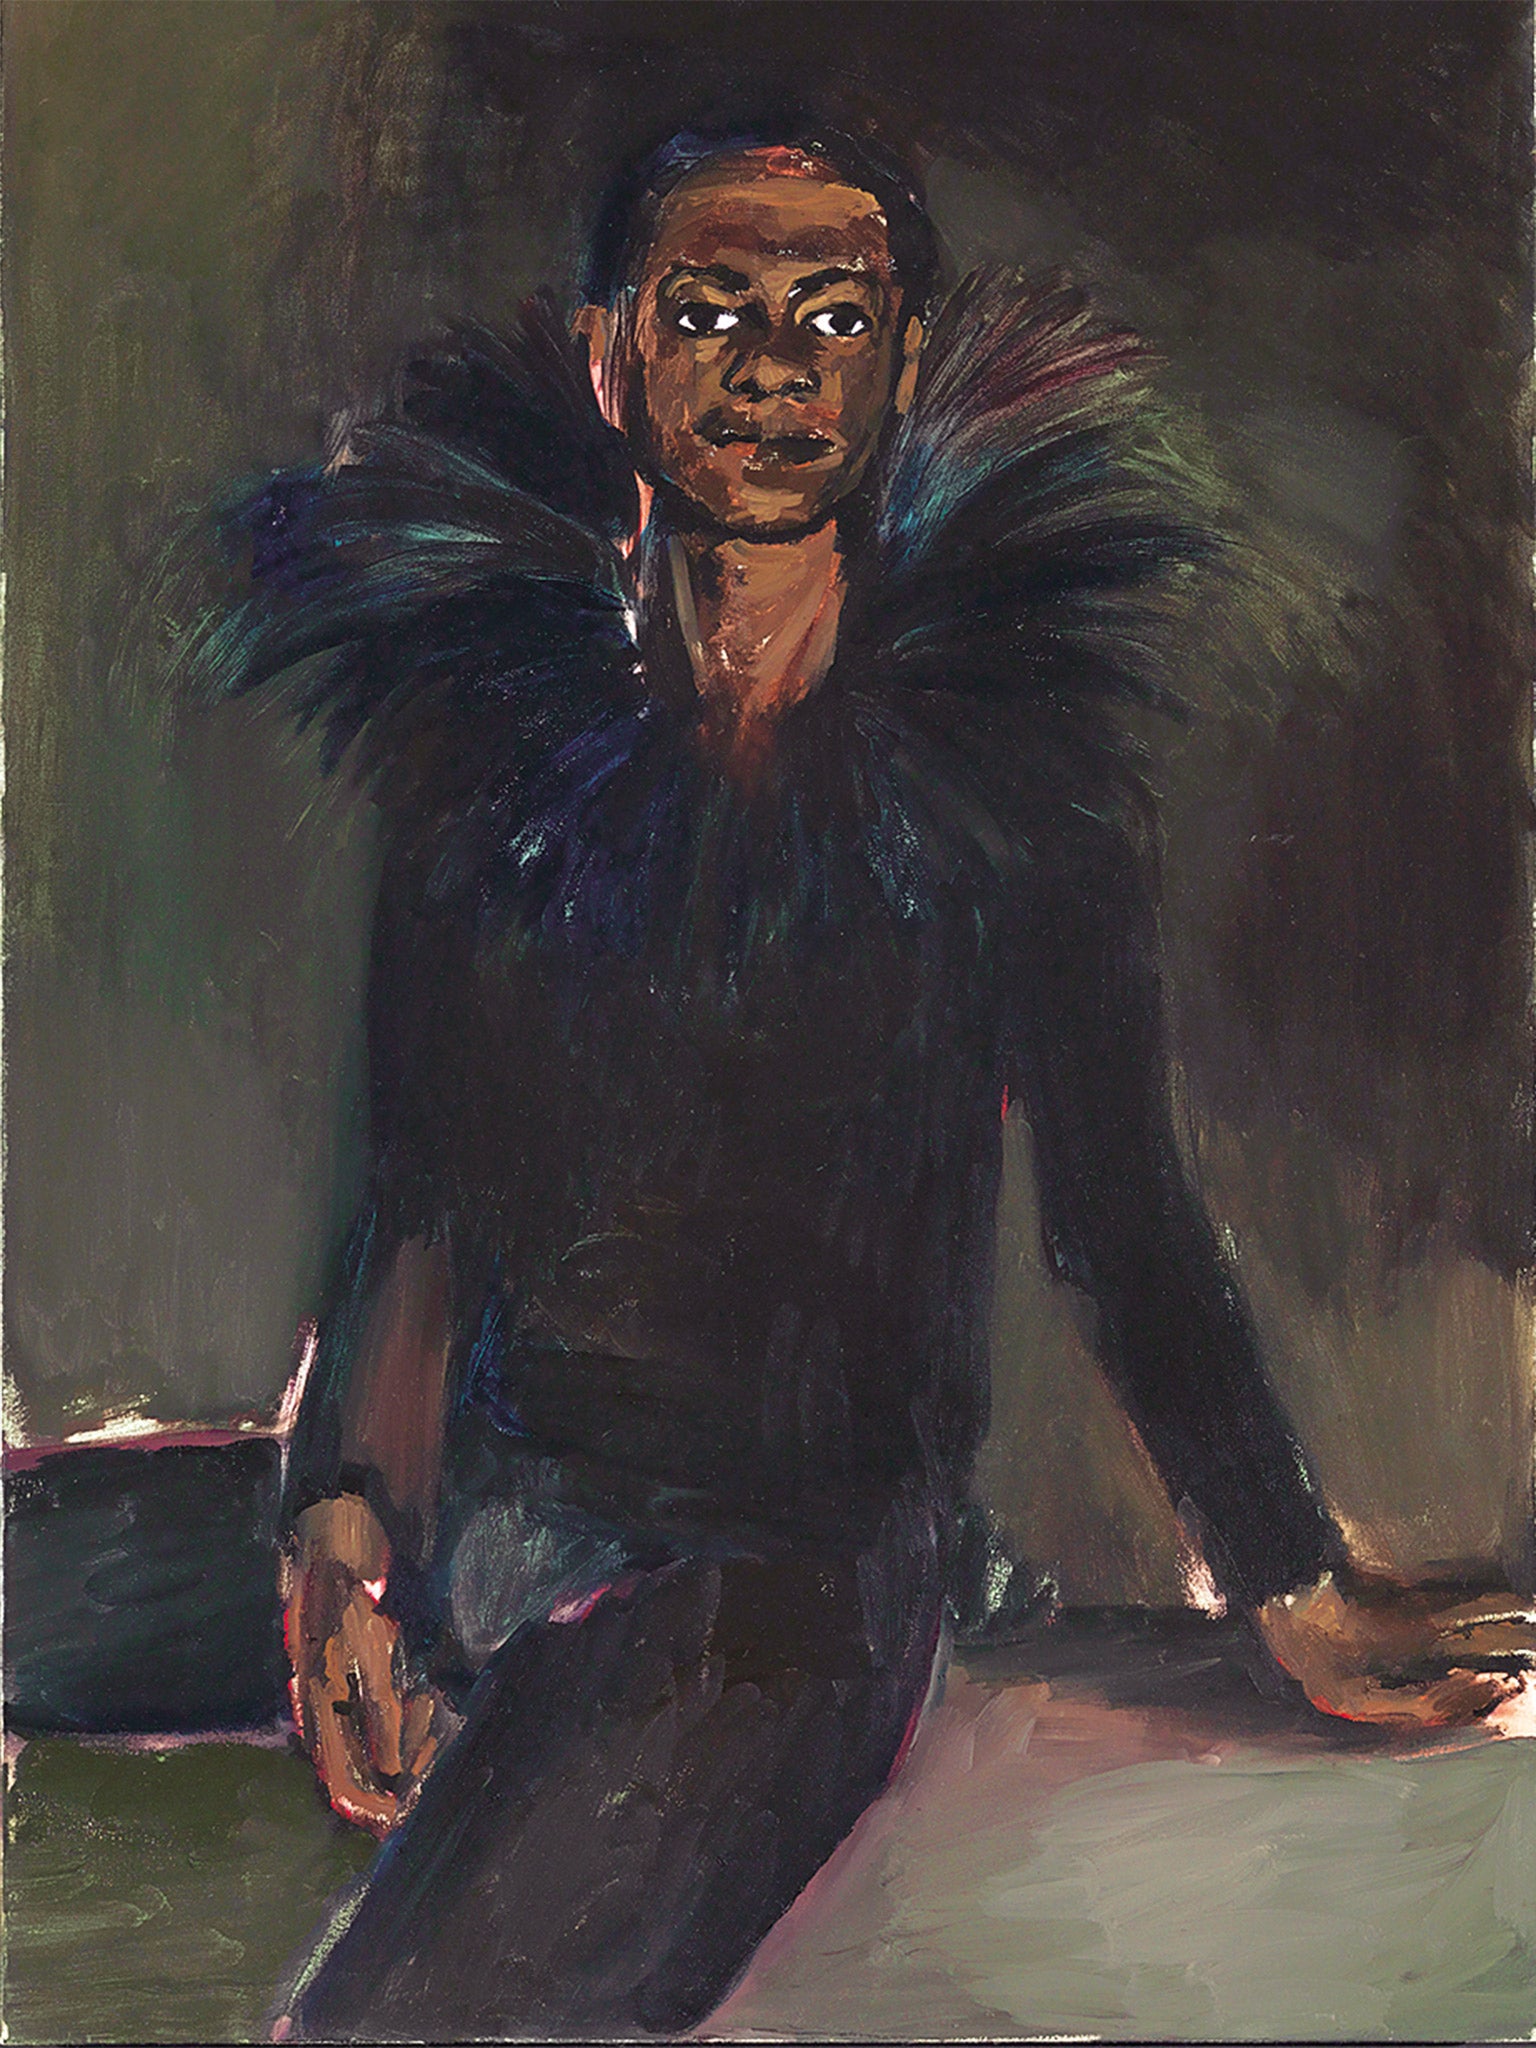 LYNETTE YIADOM-BOAKYE: GREENFINCH (2012) ‘Lynette Yiadom-Boakye’s portraits are constructs from her imagination, rather than representations of real sitters, and are characterised by a visionary otherworldliness and timelessness of setting. Her realms are uncluttered by objects that could tether her depictions to any particular era or location’ (Courtesy the artist, Jack Shainman Gallery, New York and Corvi-Mora, London © Lynette Yiadom-Boakye)